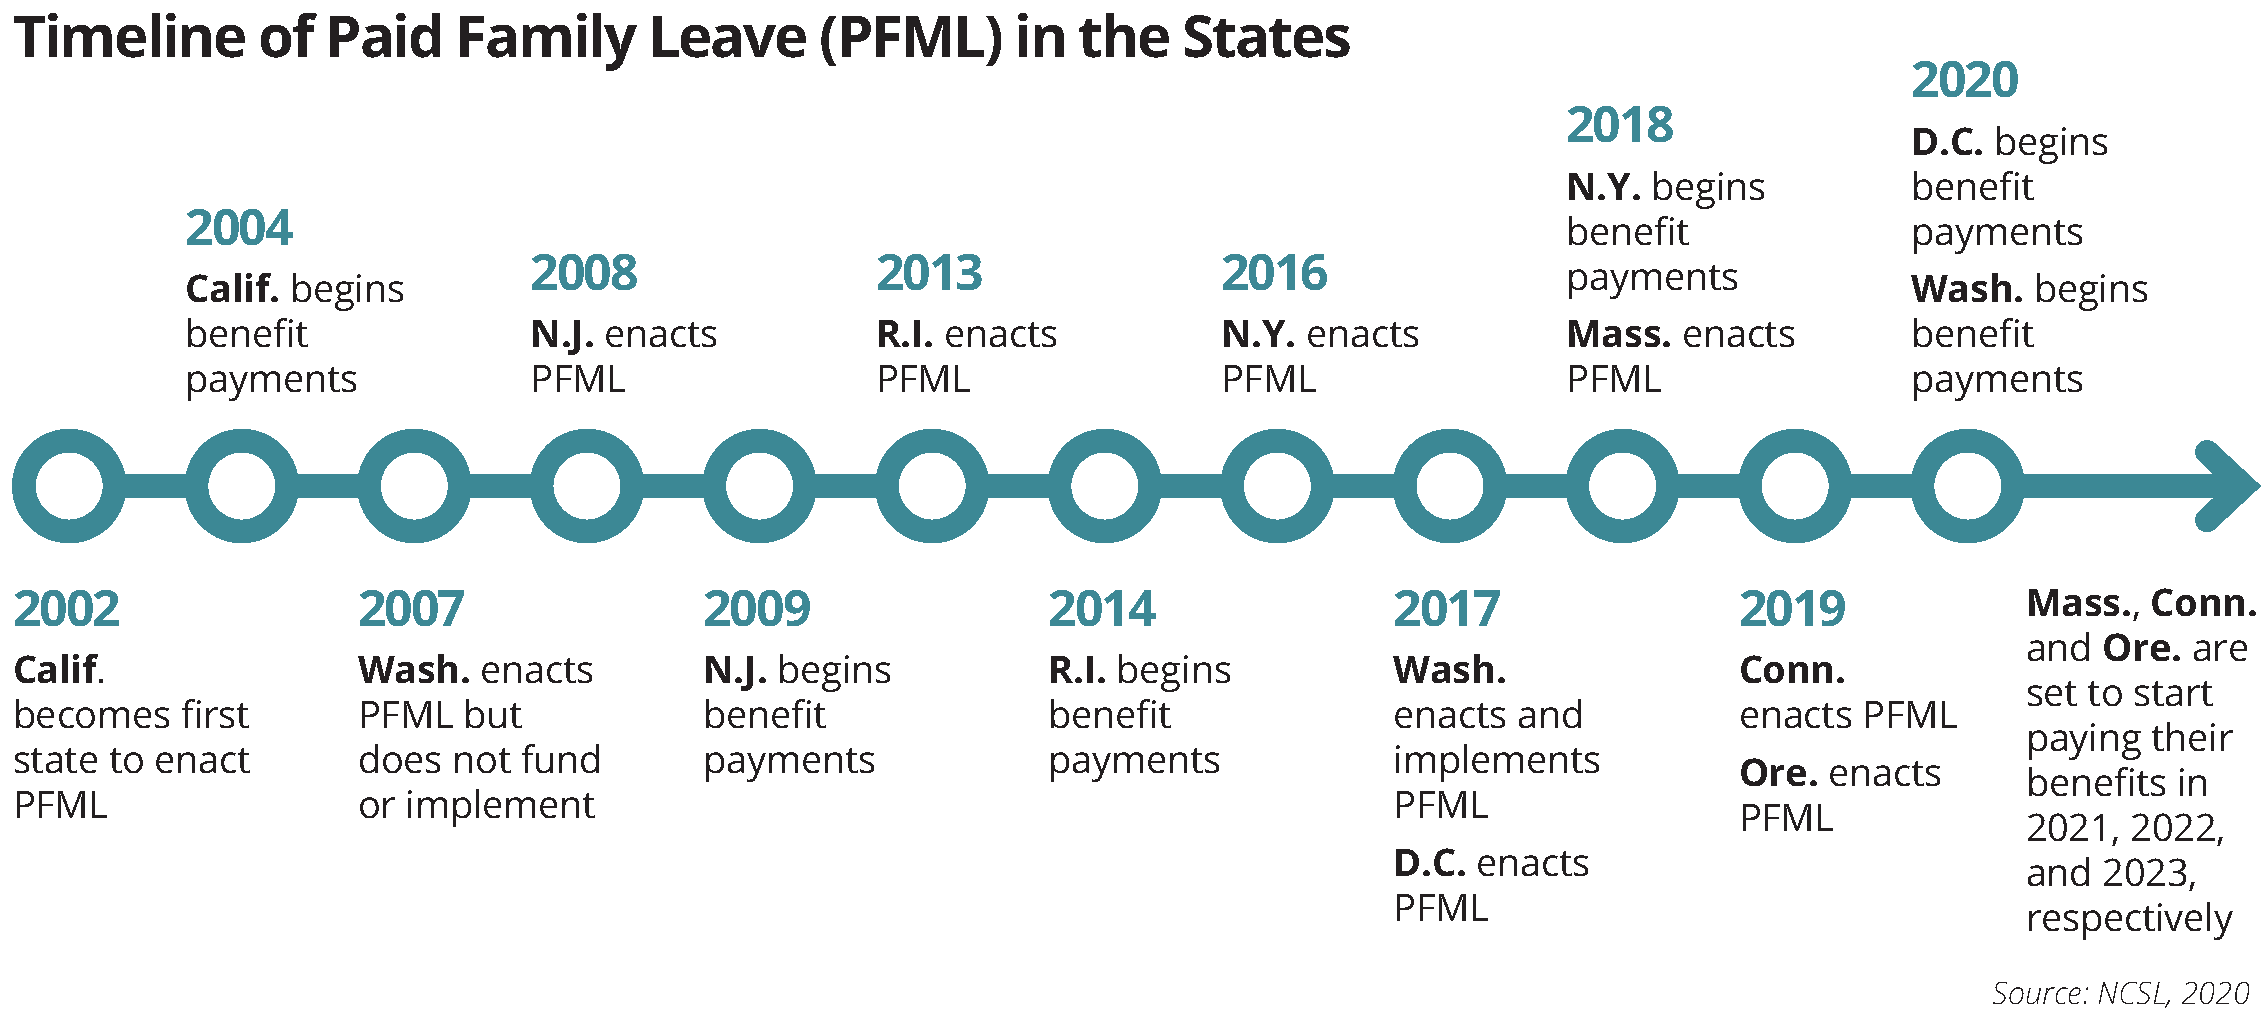 Timeline of paid family leave from 2002 through 2020